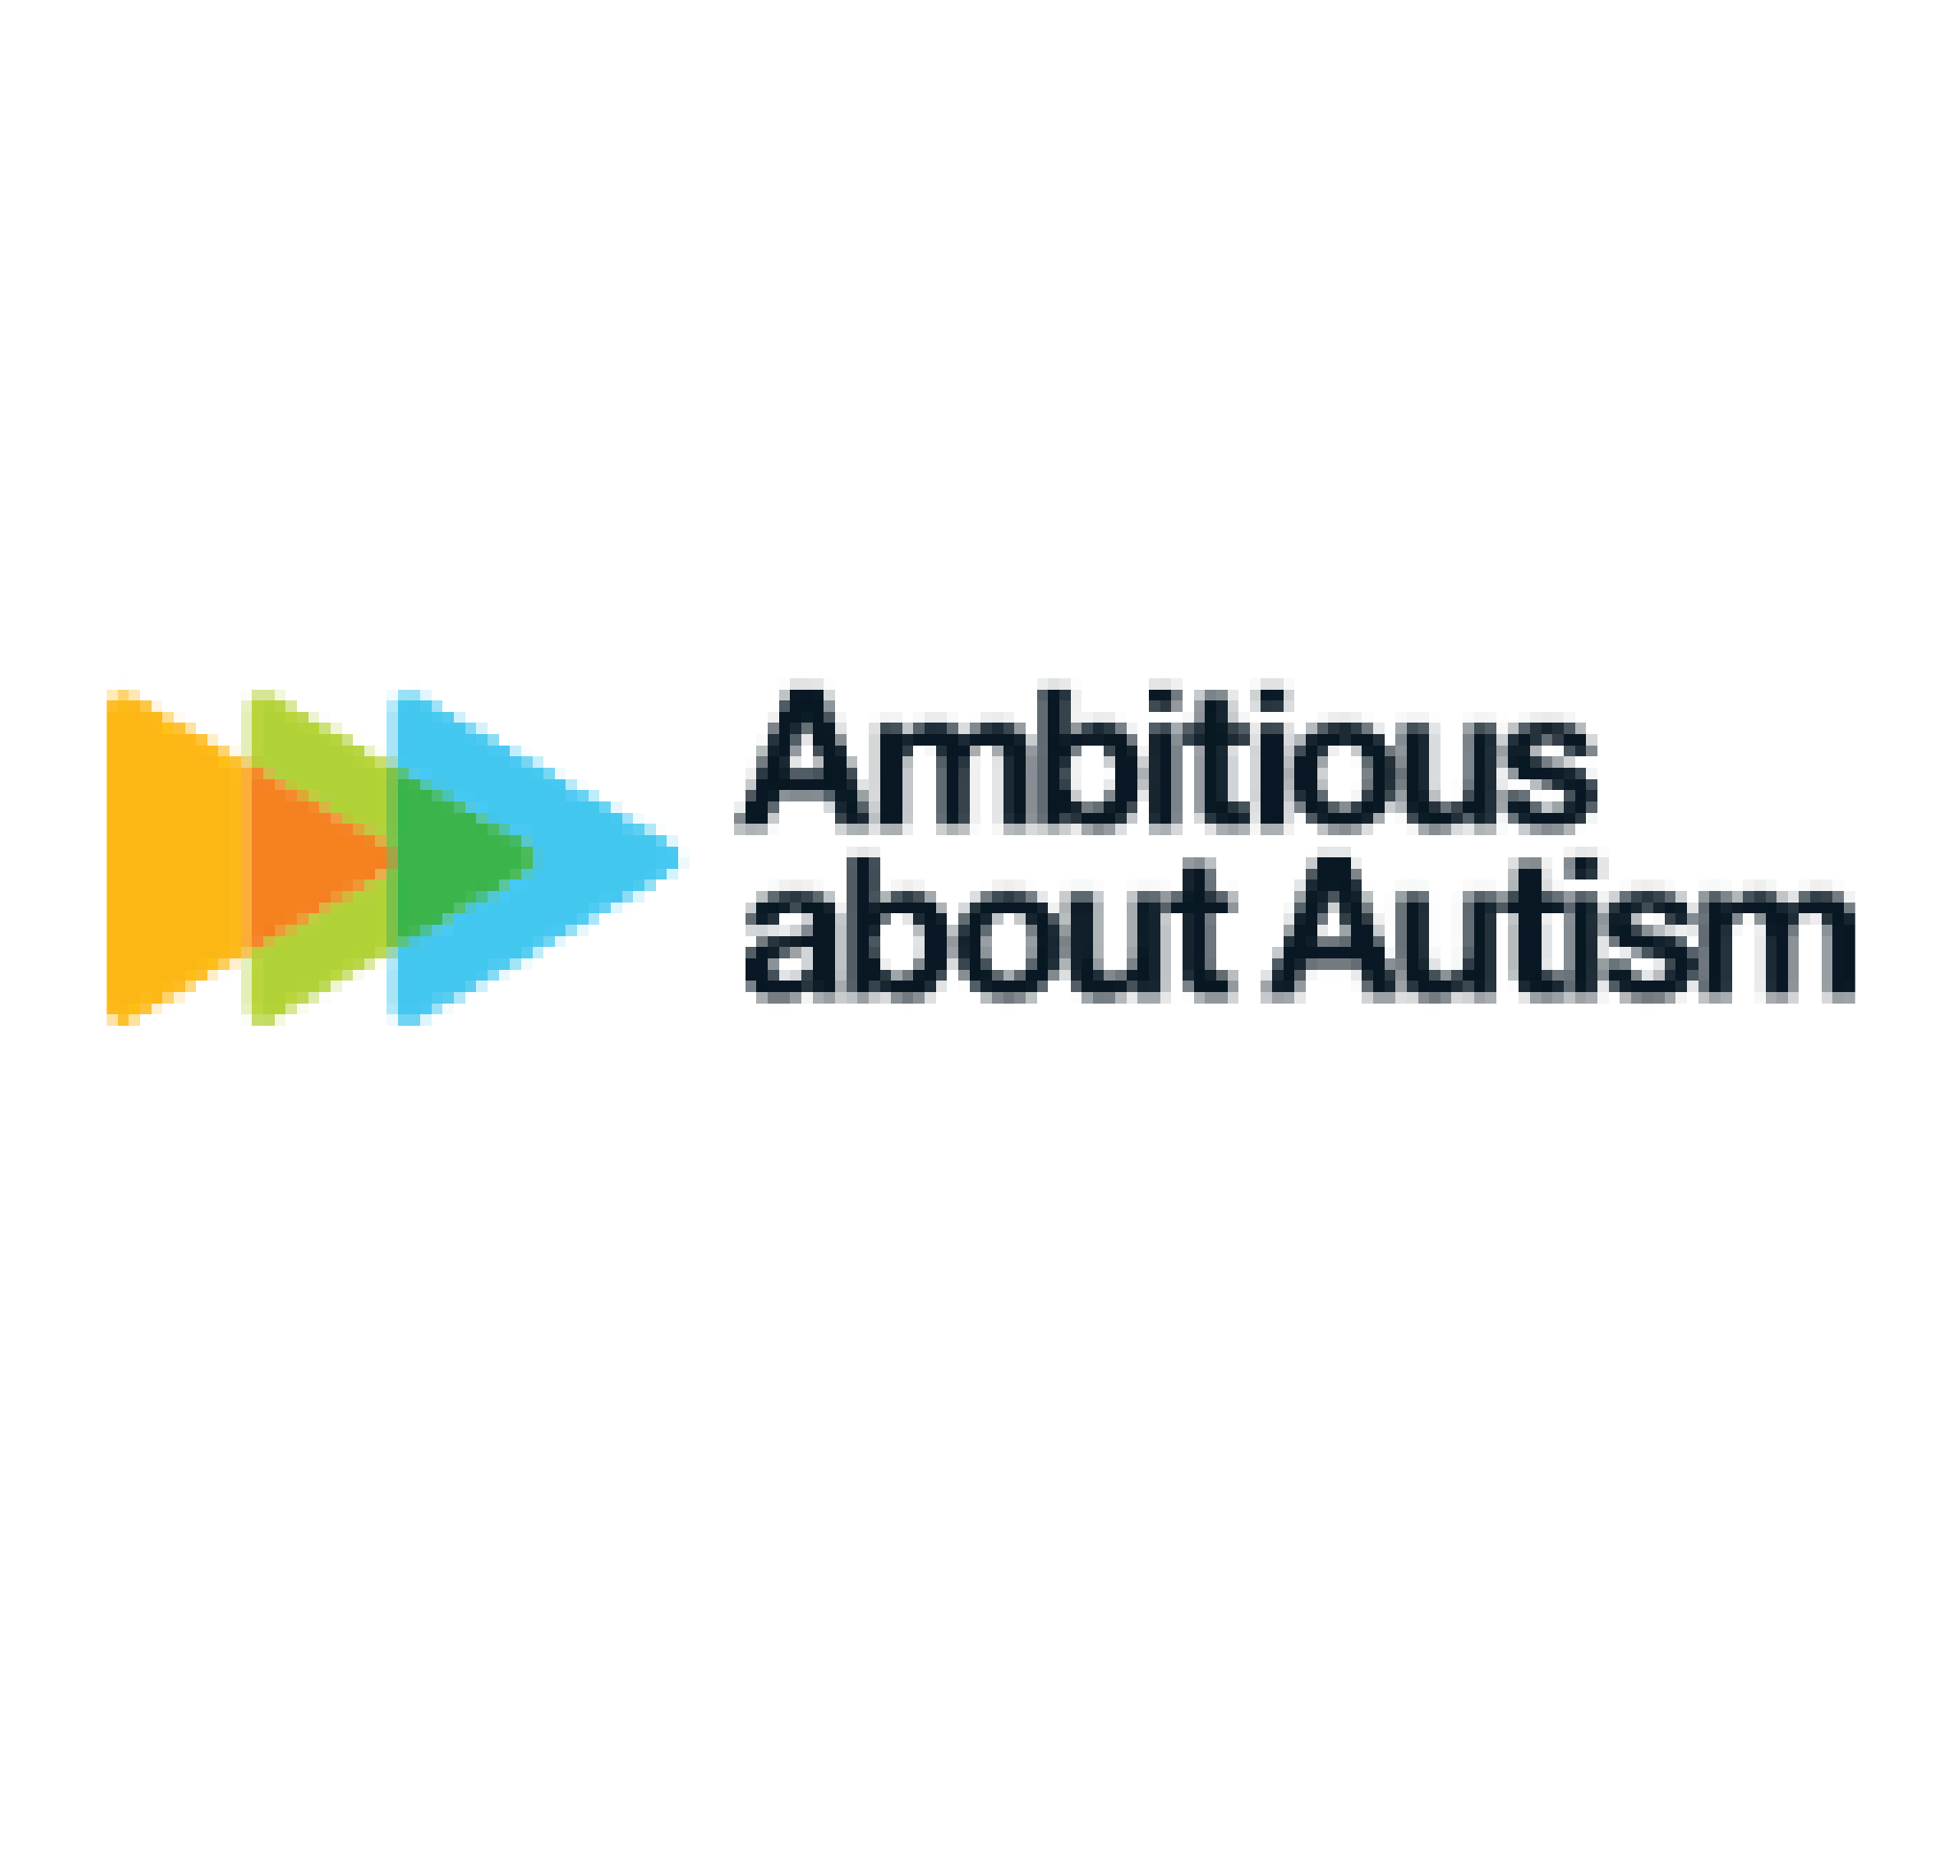 Ambitious About Autism